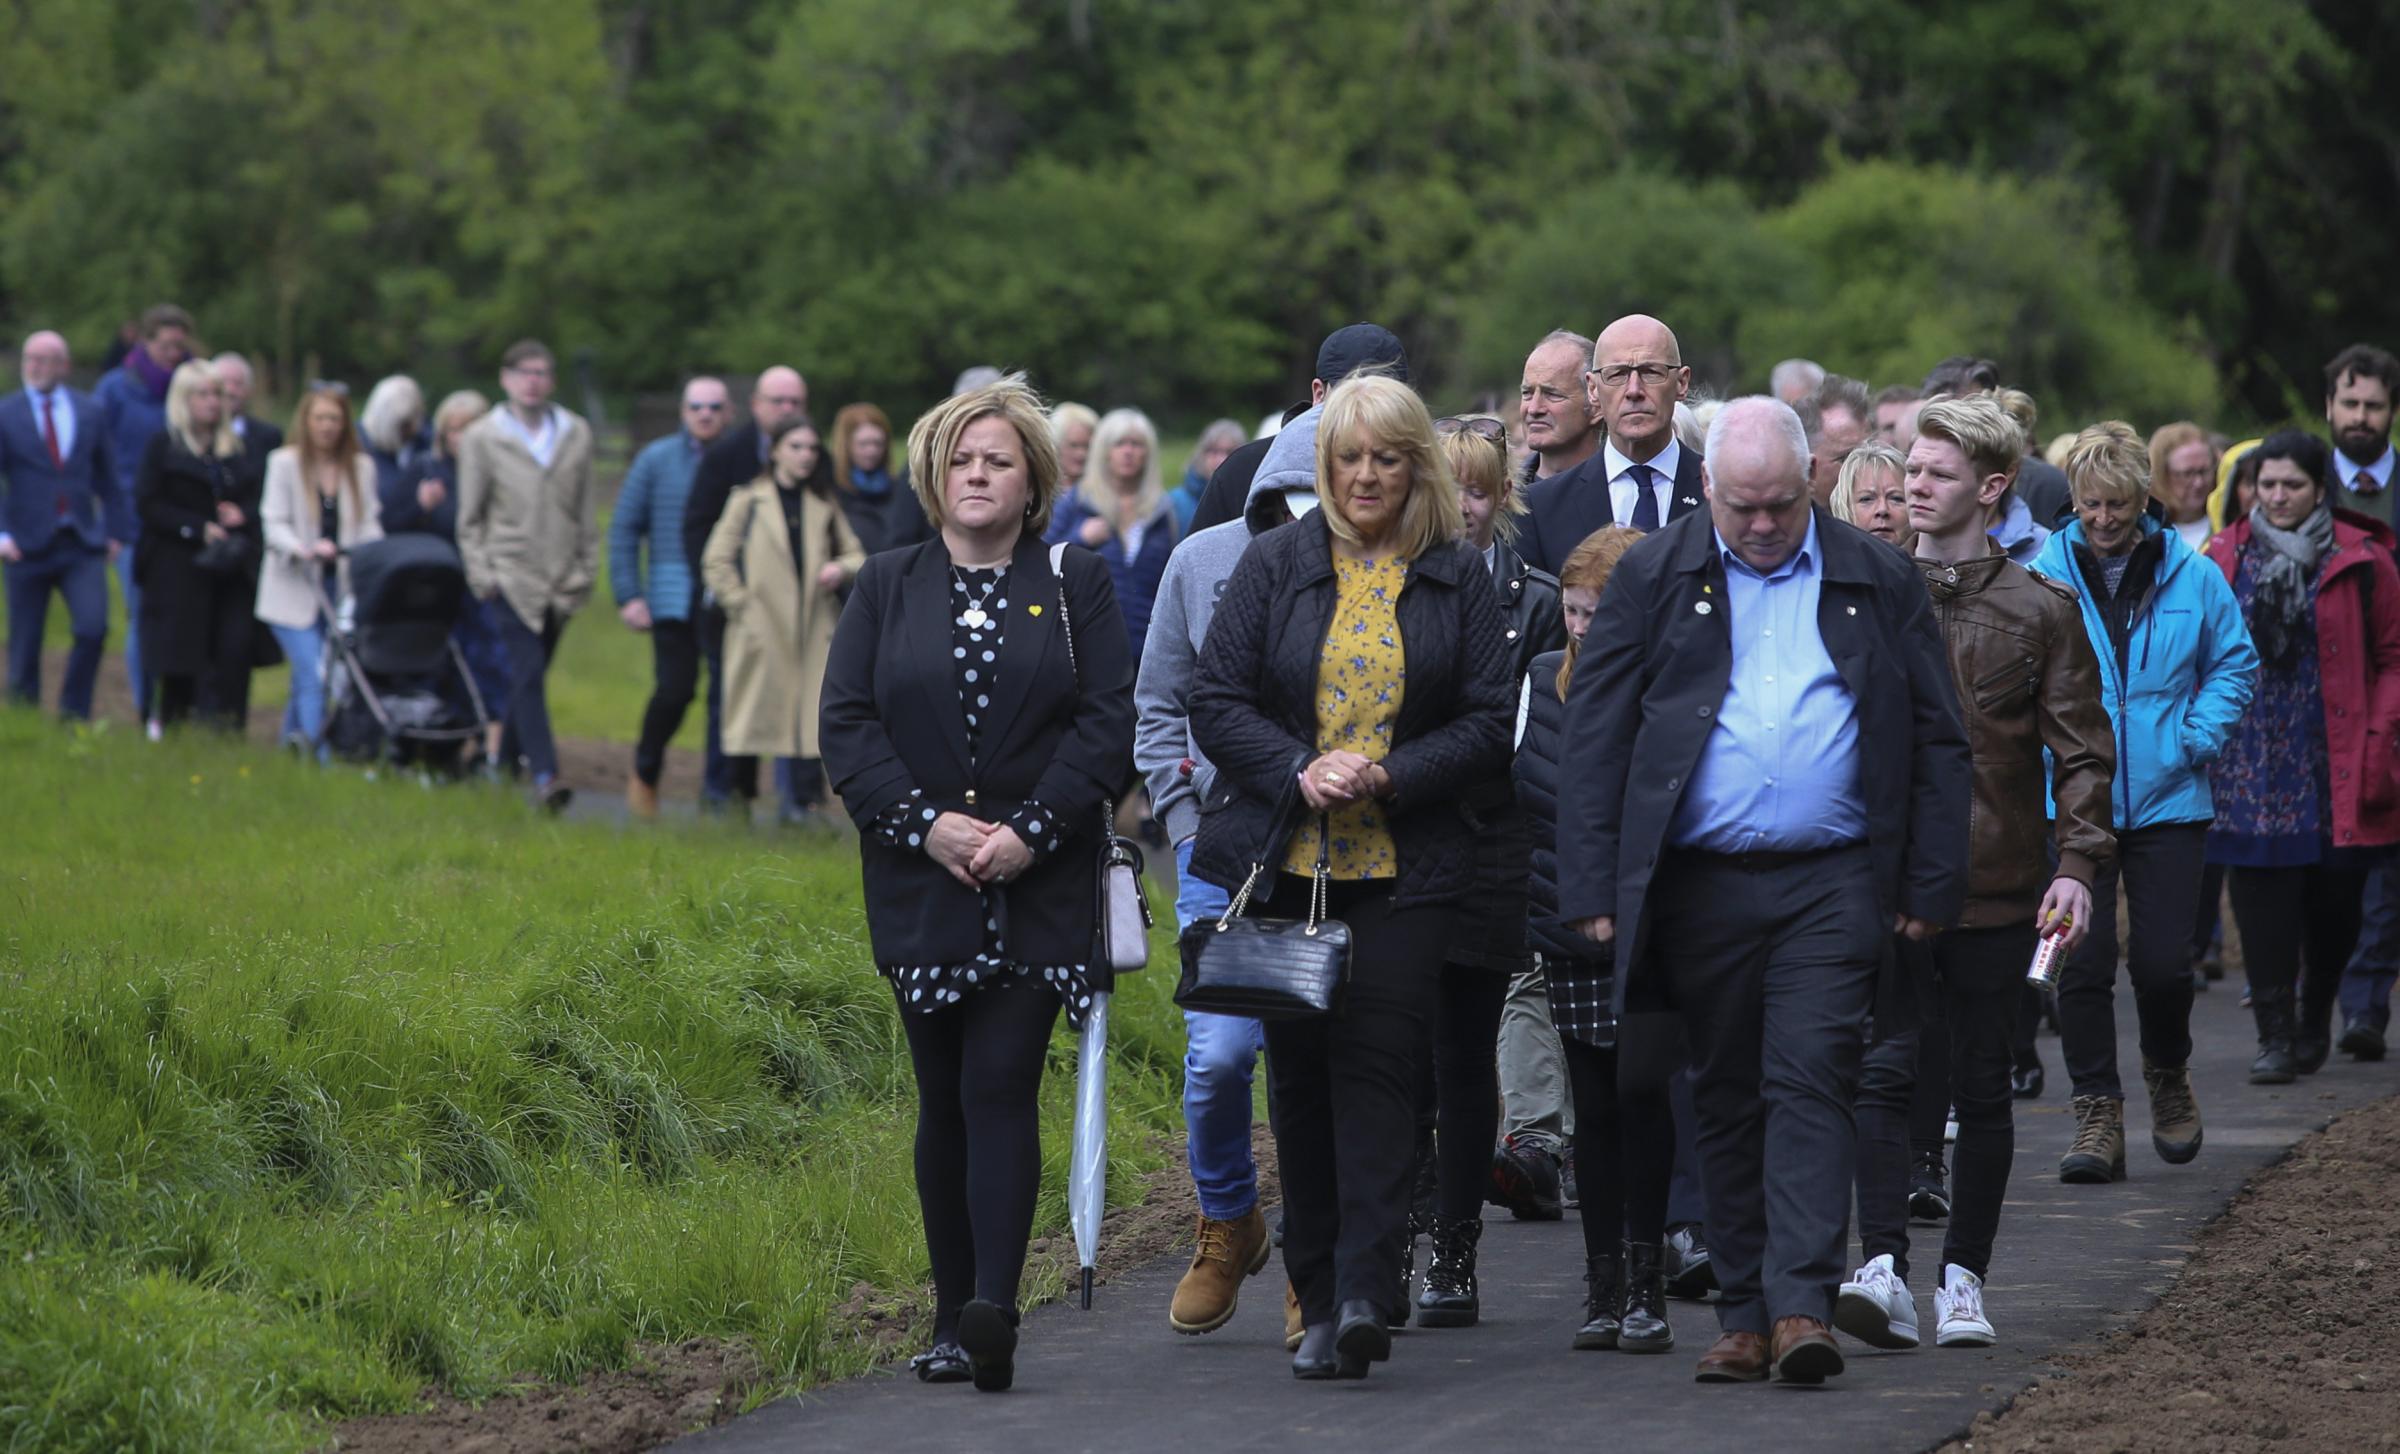 Families affected by Covid at the opening of the Covid Memorial Garden in Pollok Park. Deputy First Minister John Swinney also laid a wreath and joined families on a walk through the garden. Photo Gordon Terris Herald & Times.